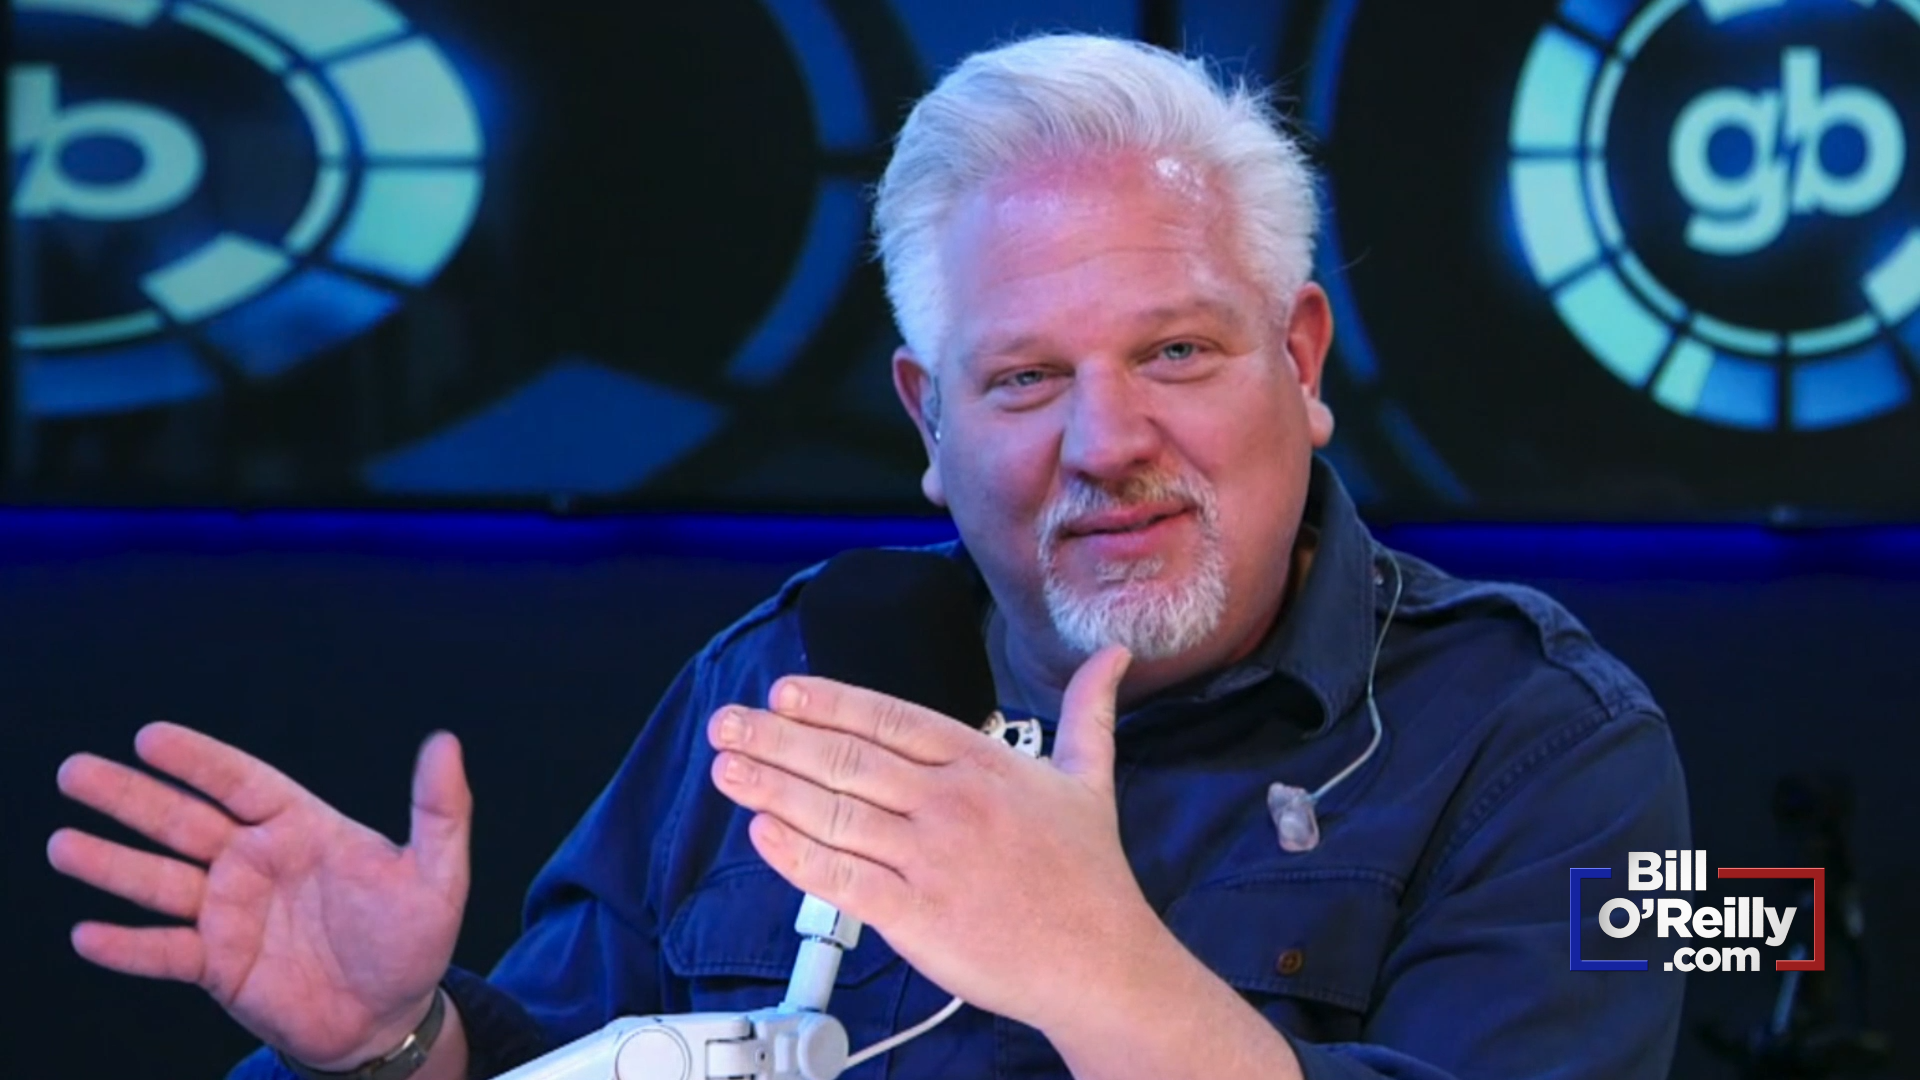 O'Reilly & Glenn Beck Clash On What Americans Will Face